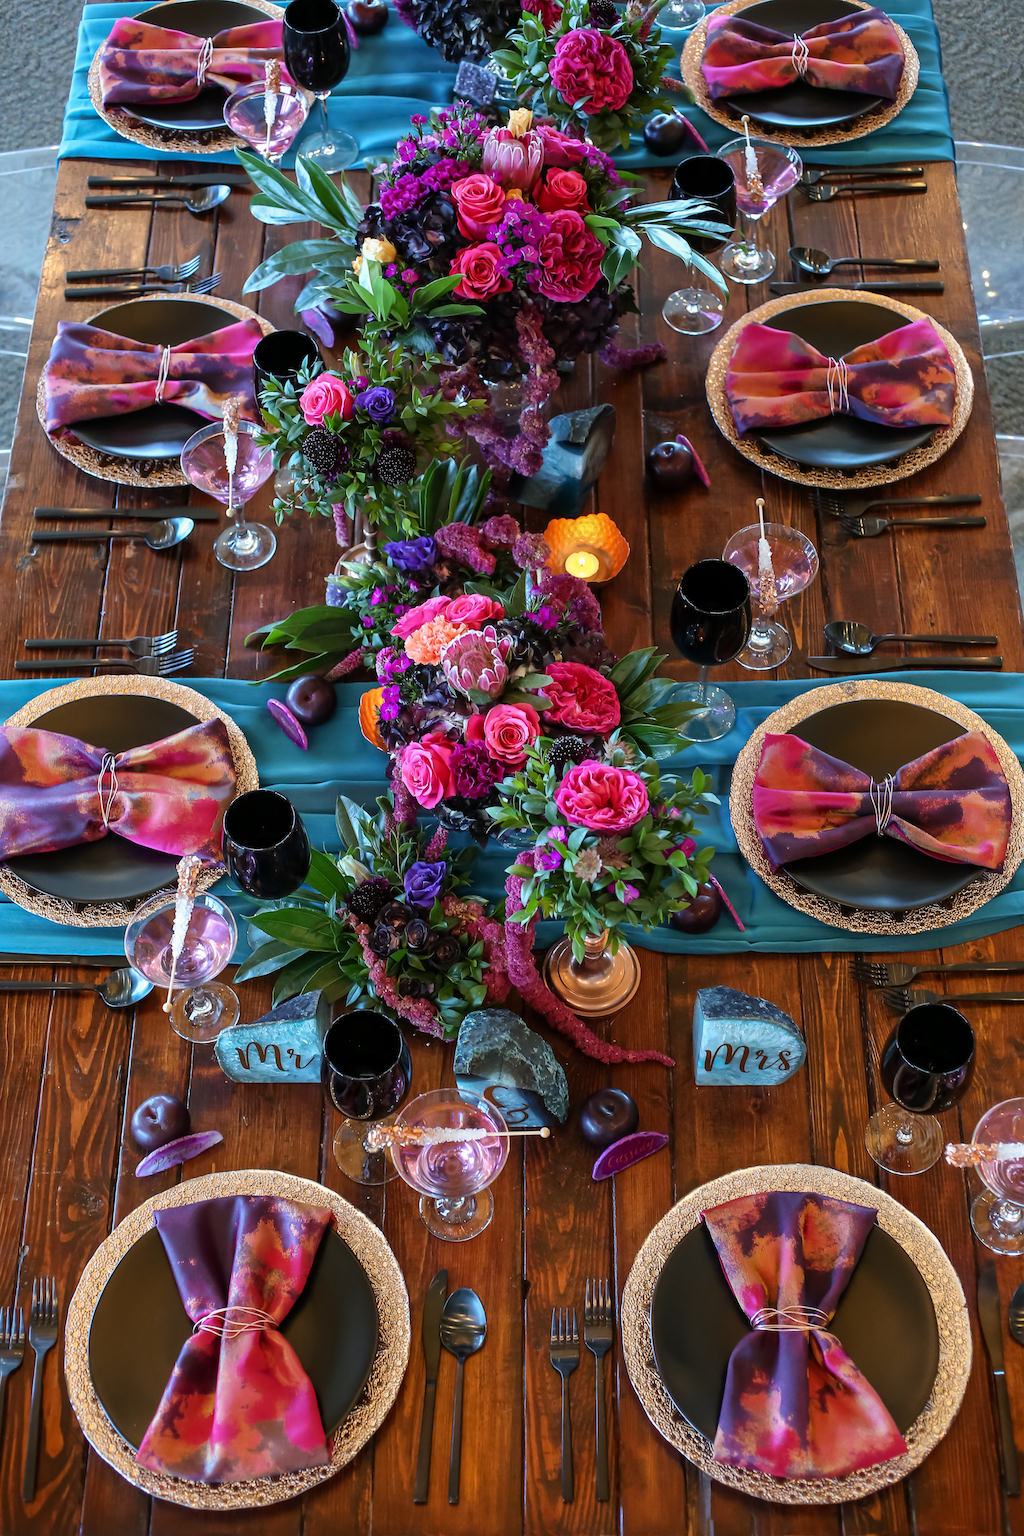 Vibrant, Modern Whimsical Wedding Reception Wooden Feasting Table with Black Flatware, Wine Glasses, and Plates, Copper Chargers and Votive Candleholders, Low Plum and Fuchsia Florals with Greenery Centerpieces, Pink and Purple Watercolor Napkins and Turquoise Linen Runners, Glitter Rock Candy Favors | Tampa Bay Wedding Planner Kelly Kennedy Weddings and Events | Furniture Rentals A Chair Affair | Florist Gabro Event Services